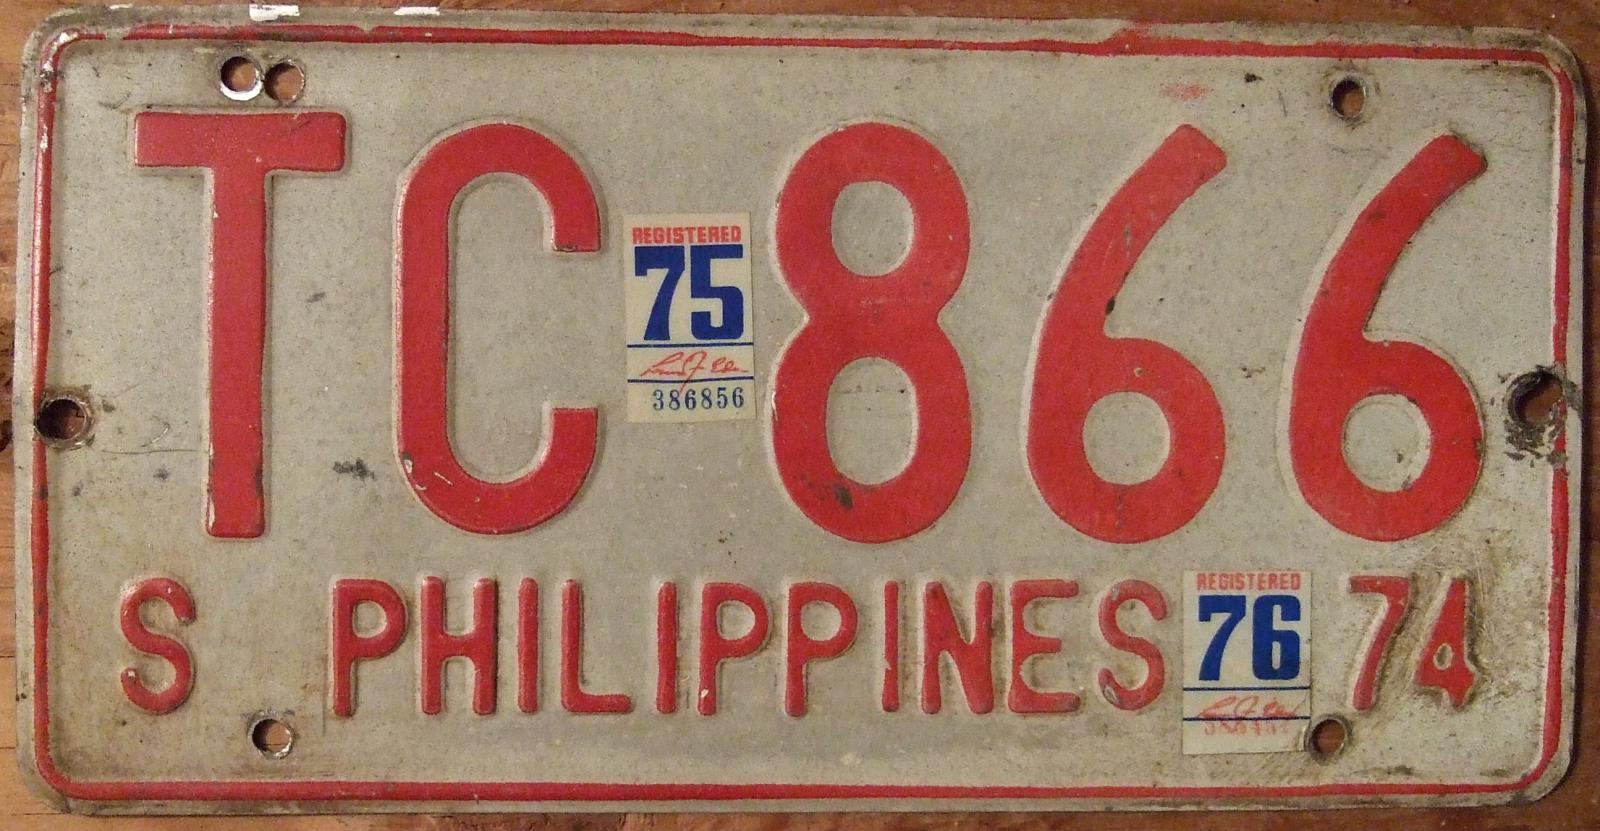 how to check lto plate number